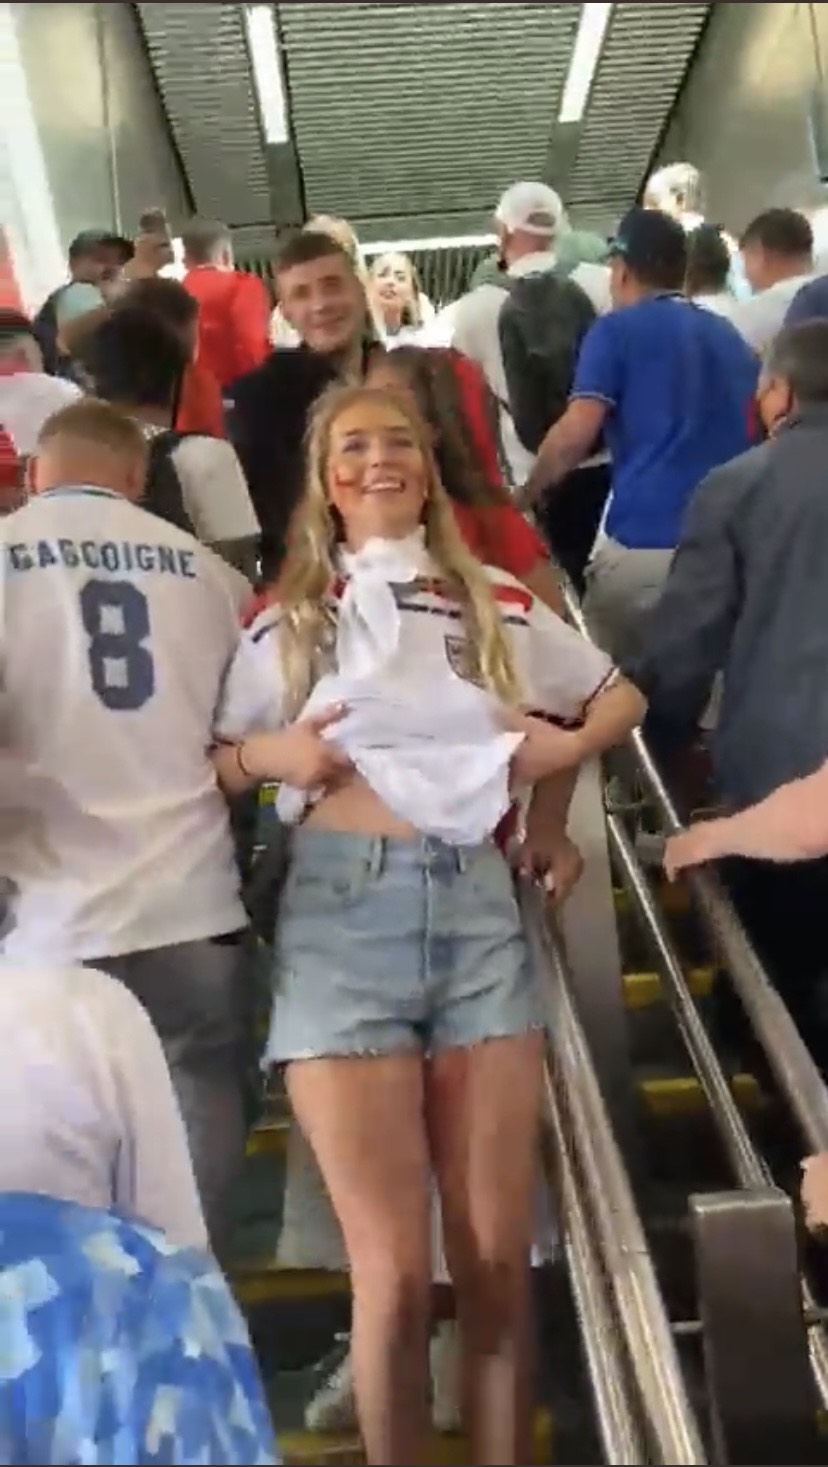 A Female Football Fan From England Flashes Boobs